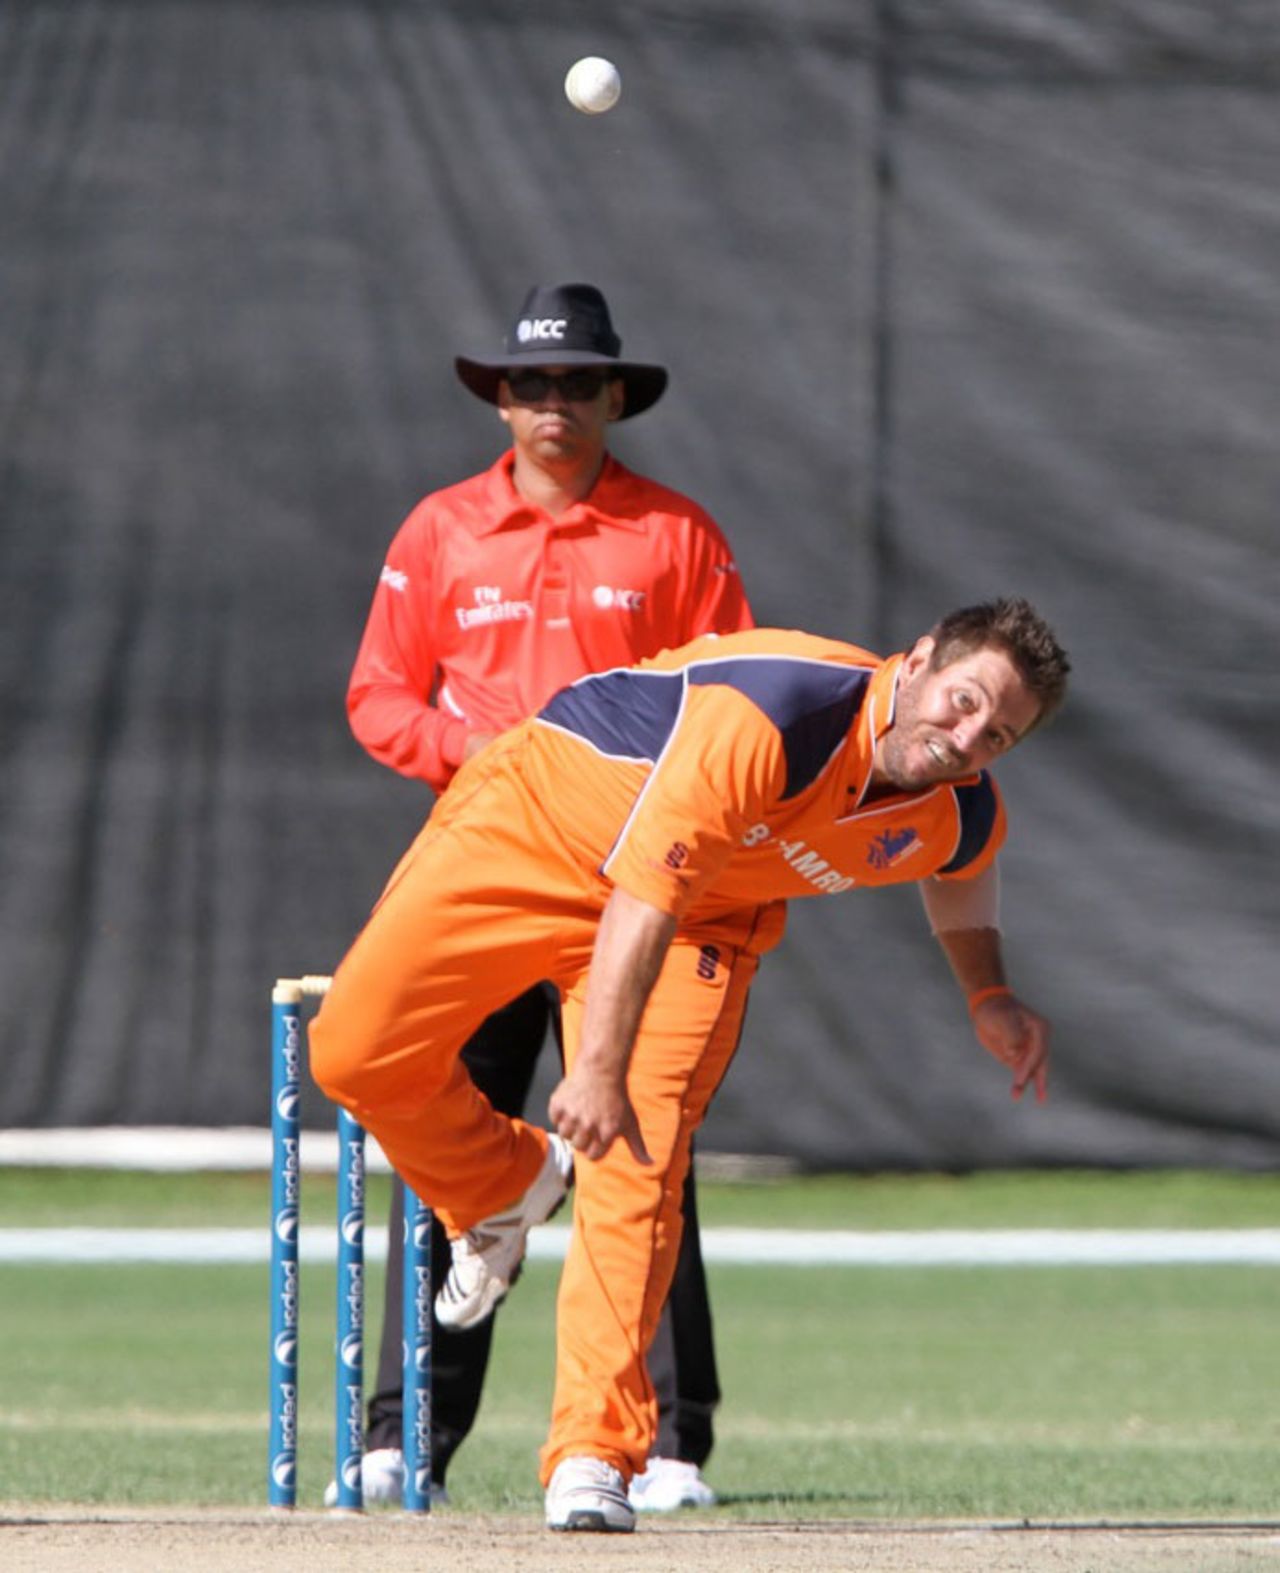 Michael Swart in his delivery stride, Namibia v Netherlands, ICC World Cricket League Championship, Windhoek, April 18, 2013